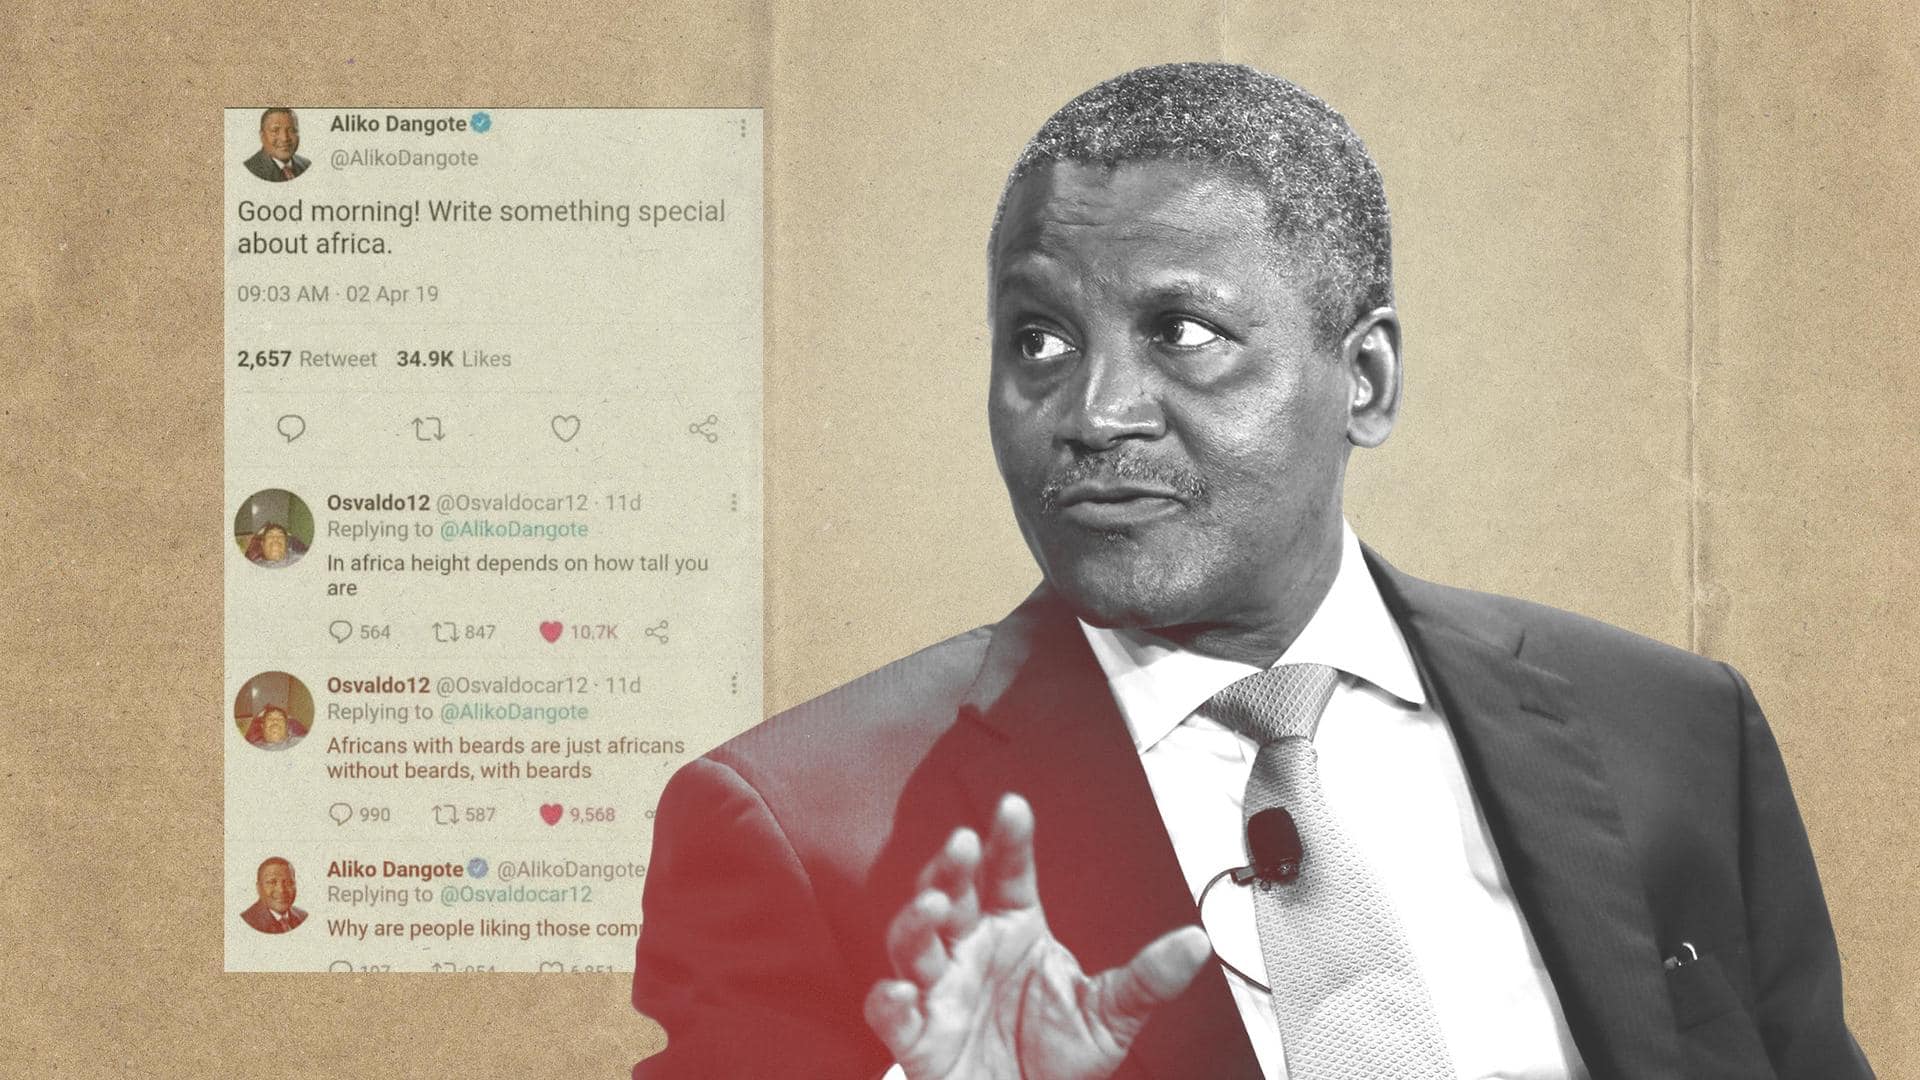 Africa's richest man faces epic Twitter trolling, ROFL guaranteed